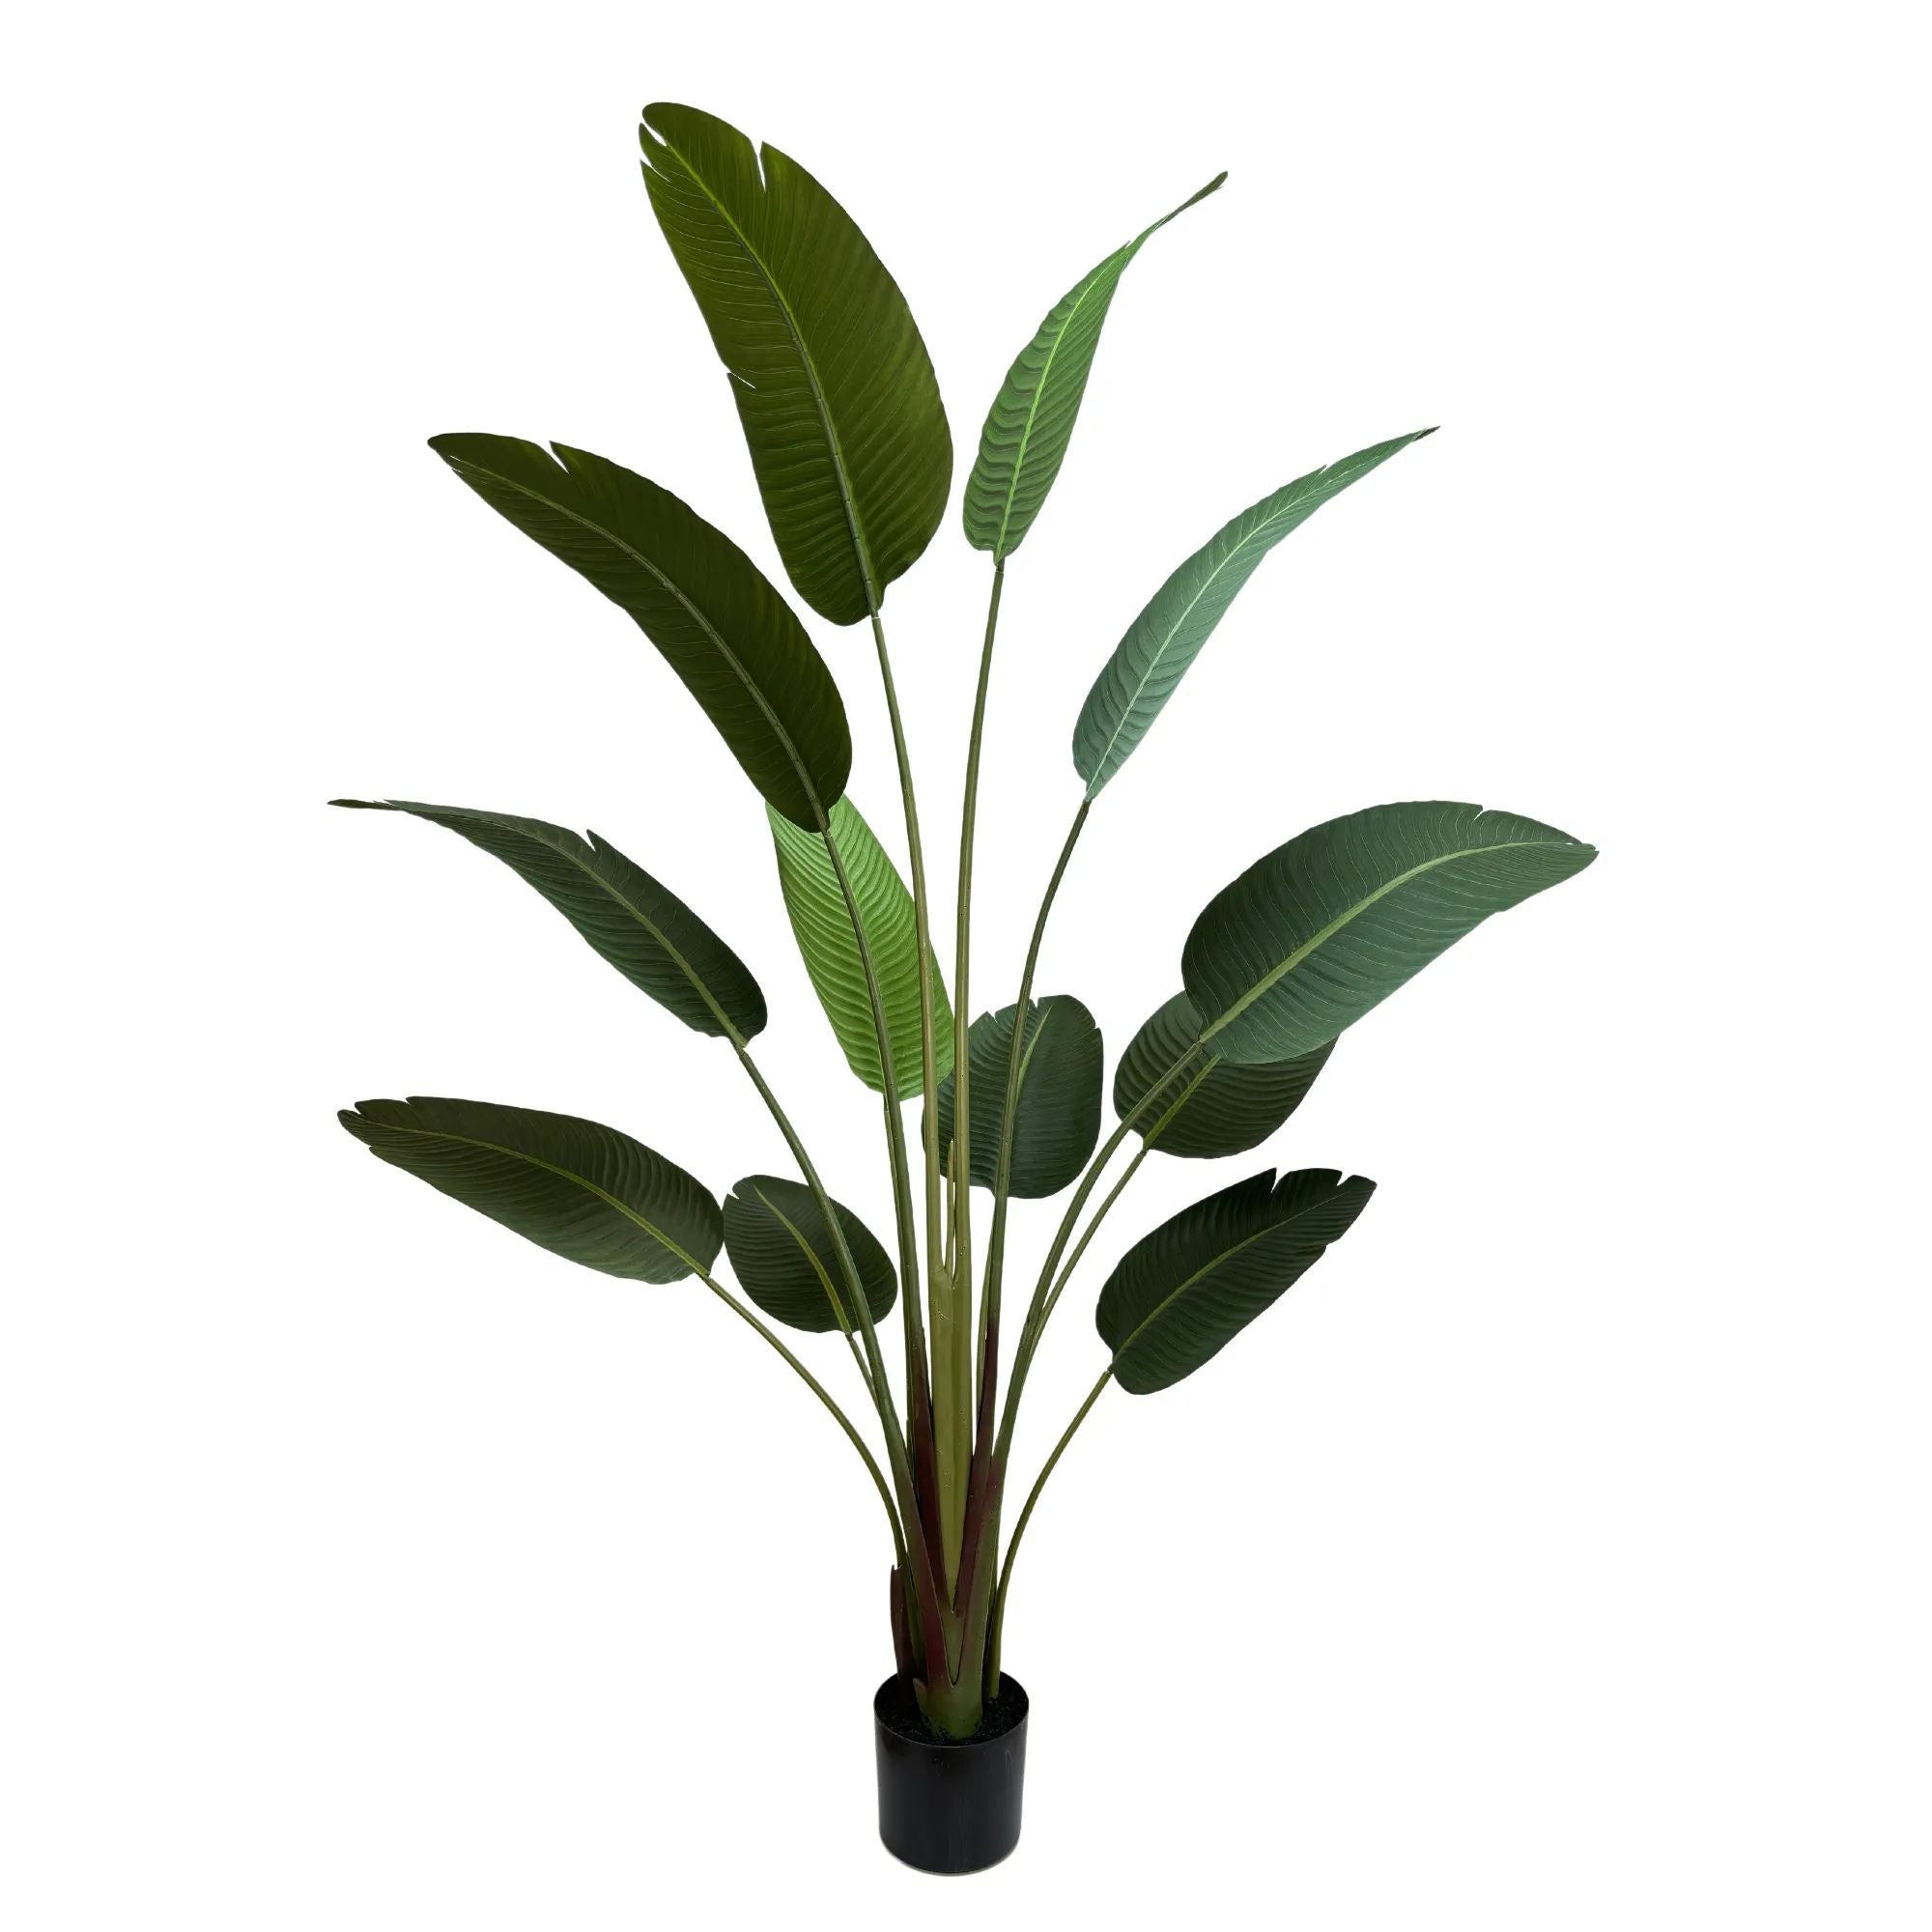 Grand Artificial Potted Travellers Palm (Banana Palm Tree) 160cm - Designer Vertical Gardens artificial shrubs Artificial Shrubs and Small plants